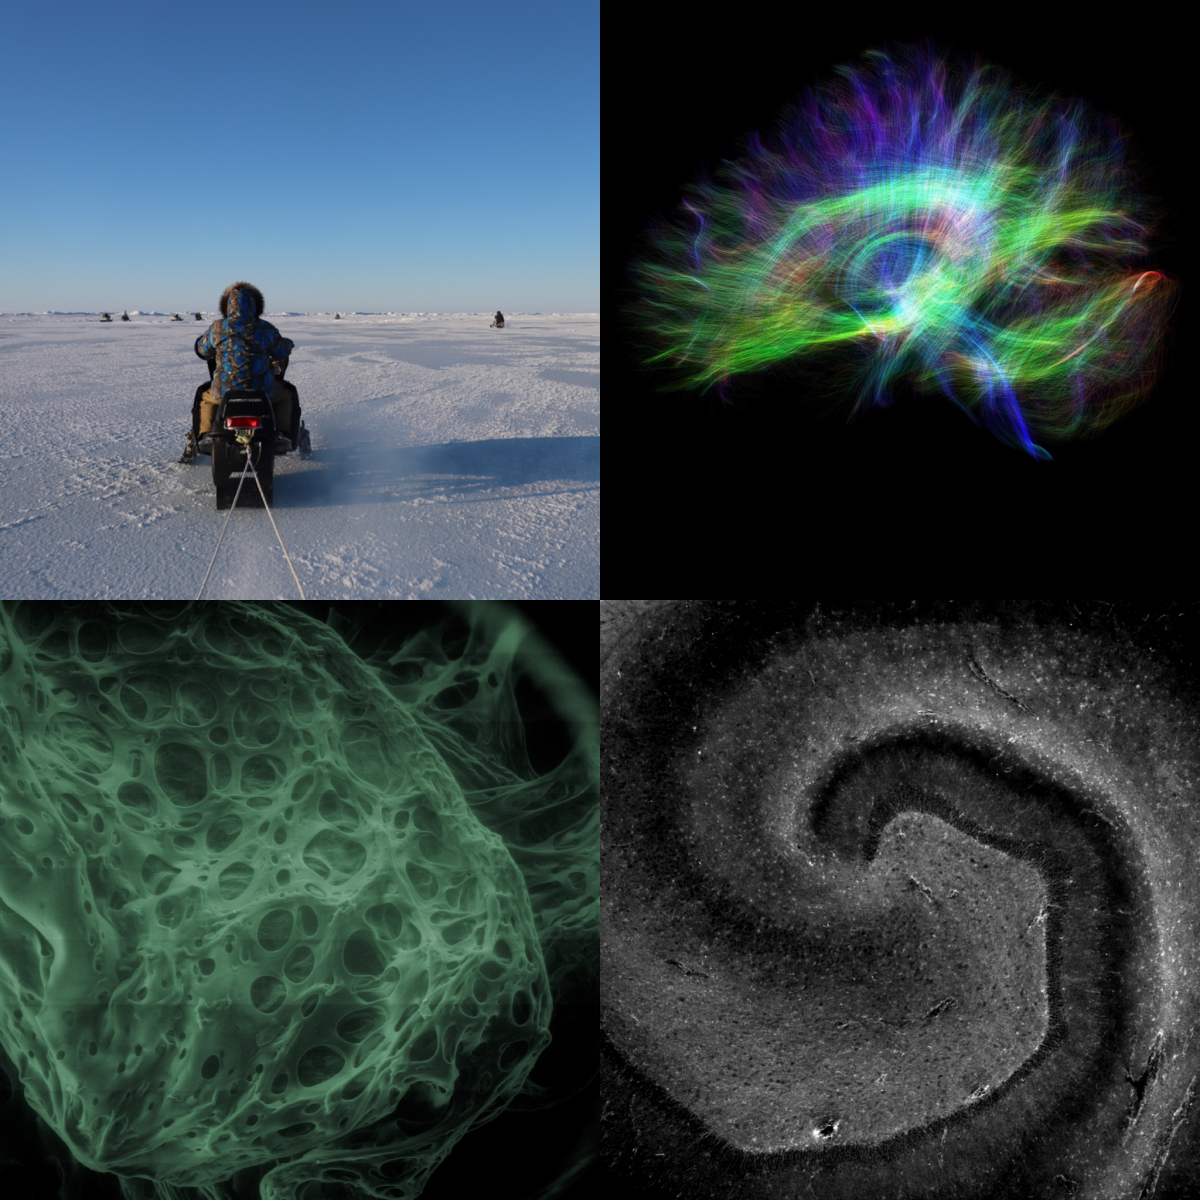 [4 winning images from the 2020 Art of Research photo contest]